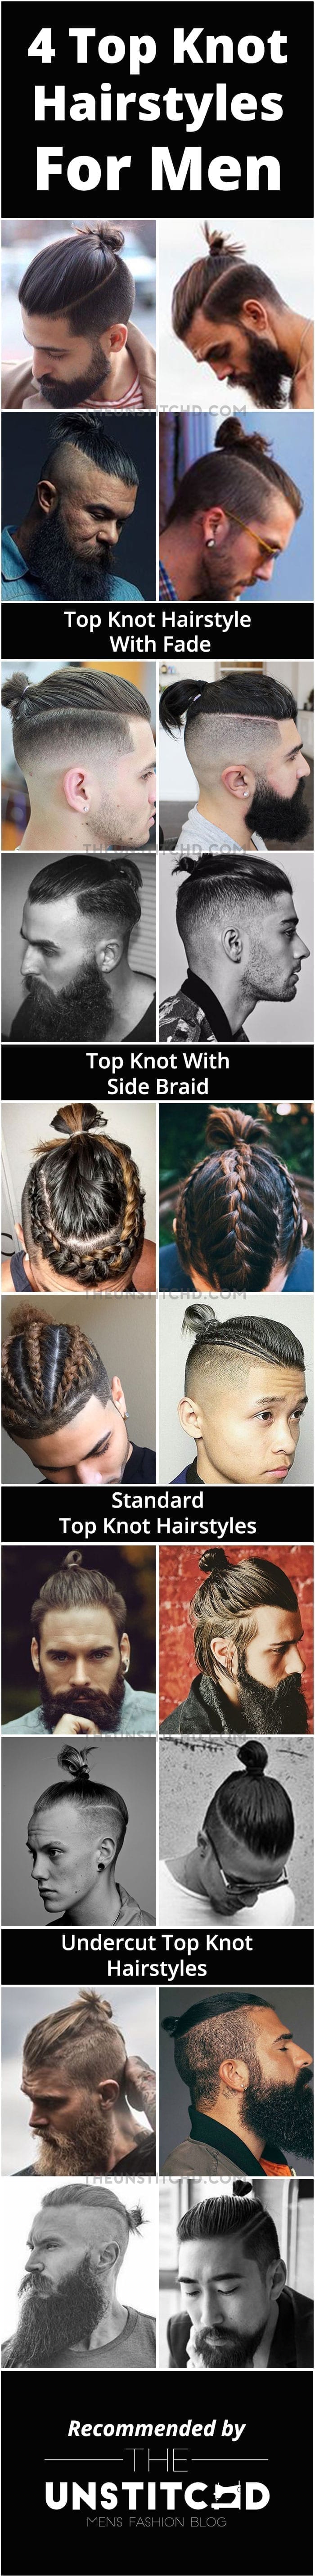 Knot-Hairstyles